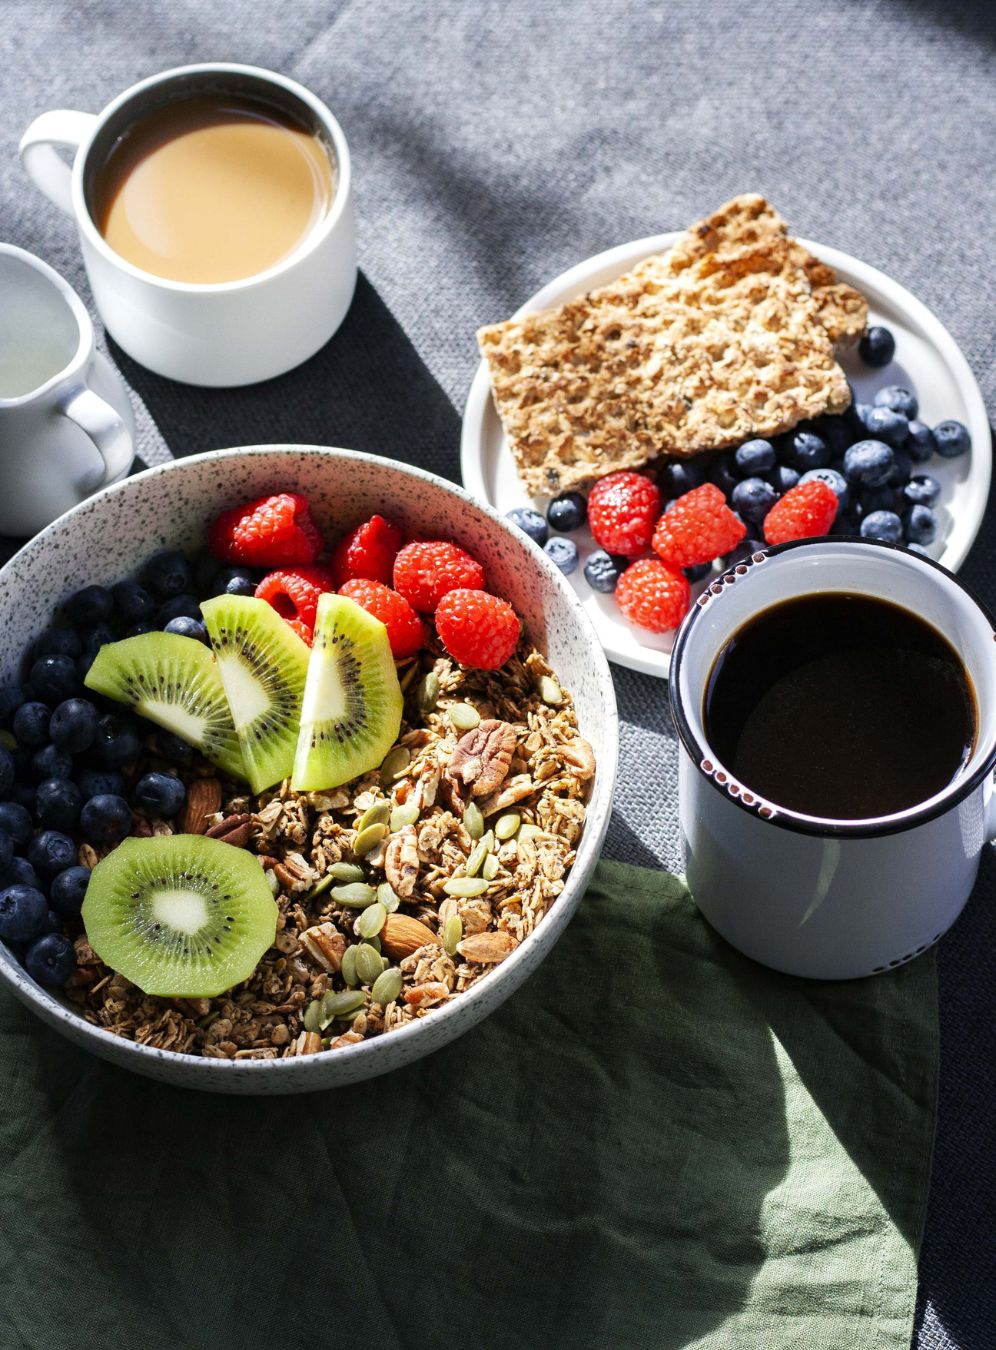 A complete vegan breakfast with grains, nuts fruit, coffee and nut milk